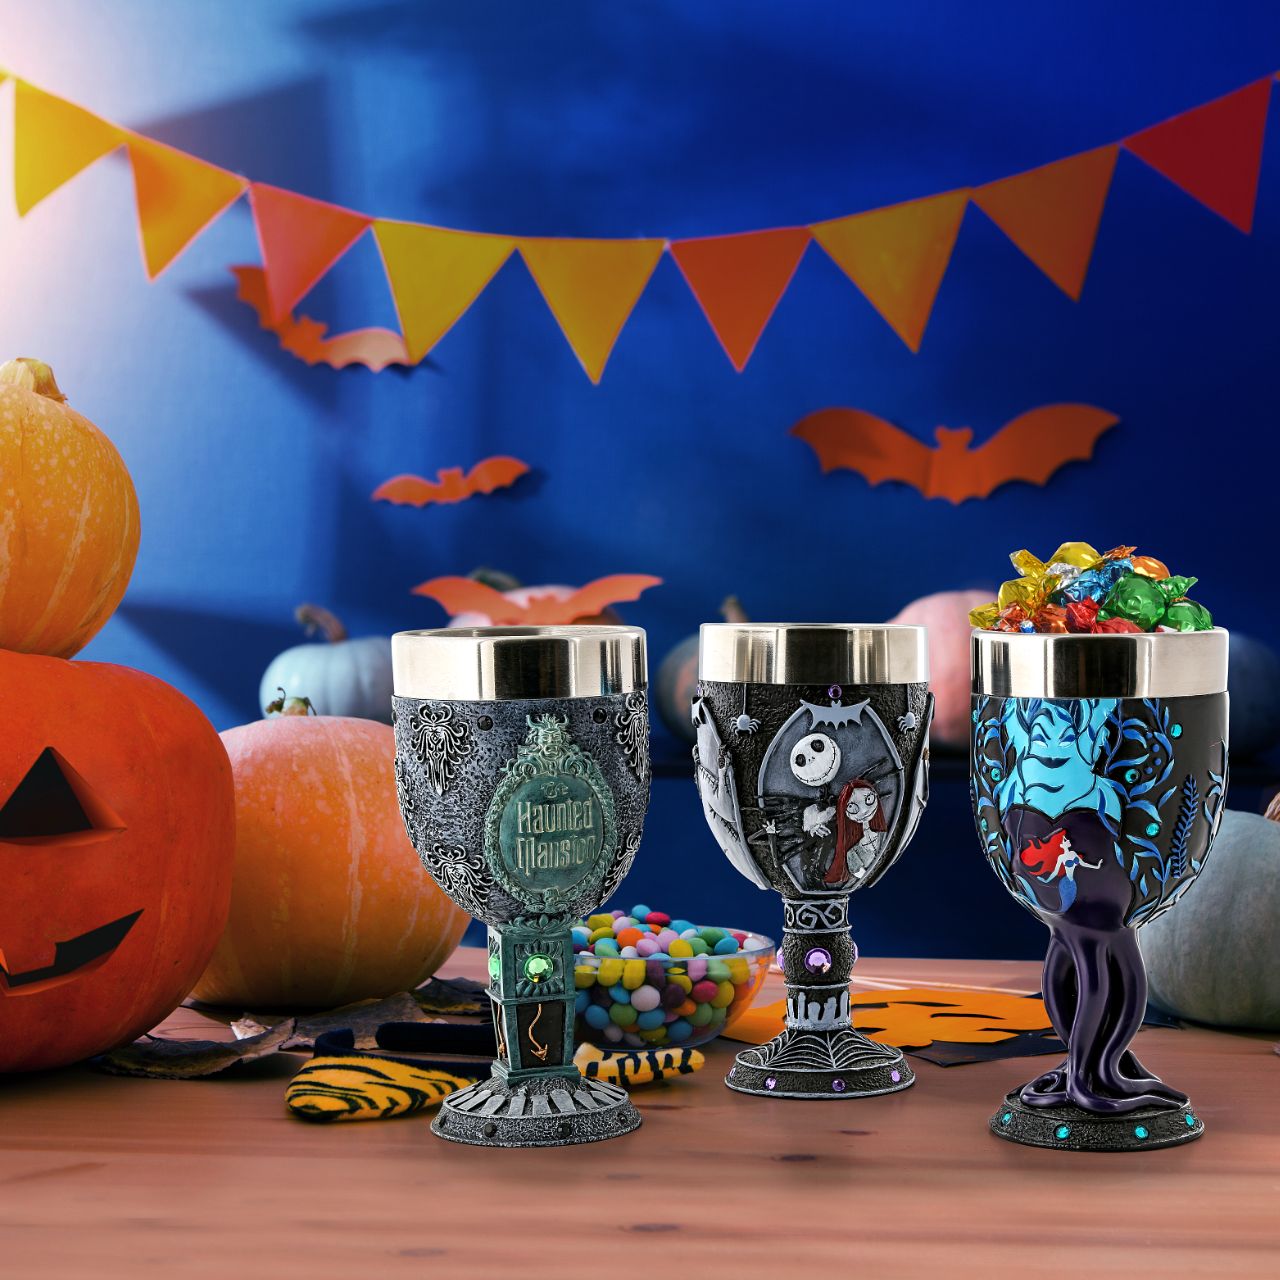 The Nightmare Before Christmas Decorative Goblet  The official chalice of Halloween Town, celebrate your holidays in style with this stainless steel lined decorative goblet adorned with frightful imagery from The Nightmare Before Christmas. 